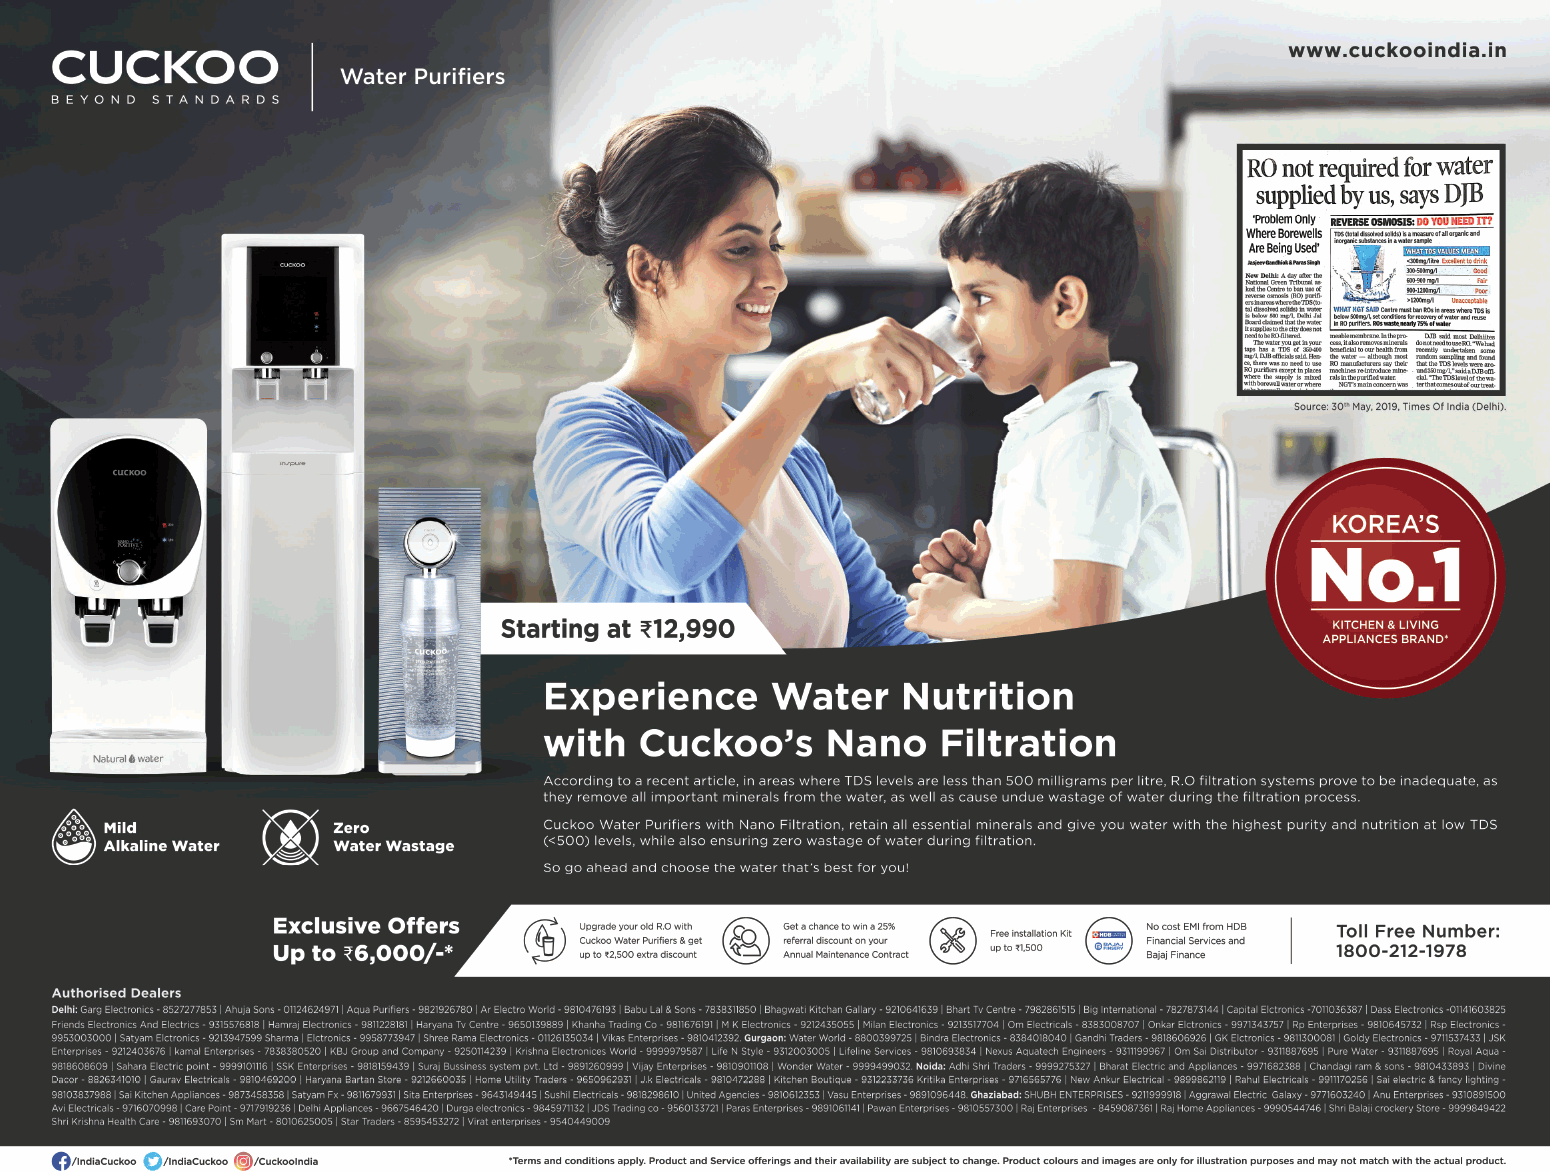 cuckoo-water-purifiers-starting-at-rupees-12990-ad-delhi-times-02-06-2019.png